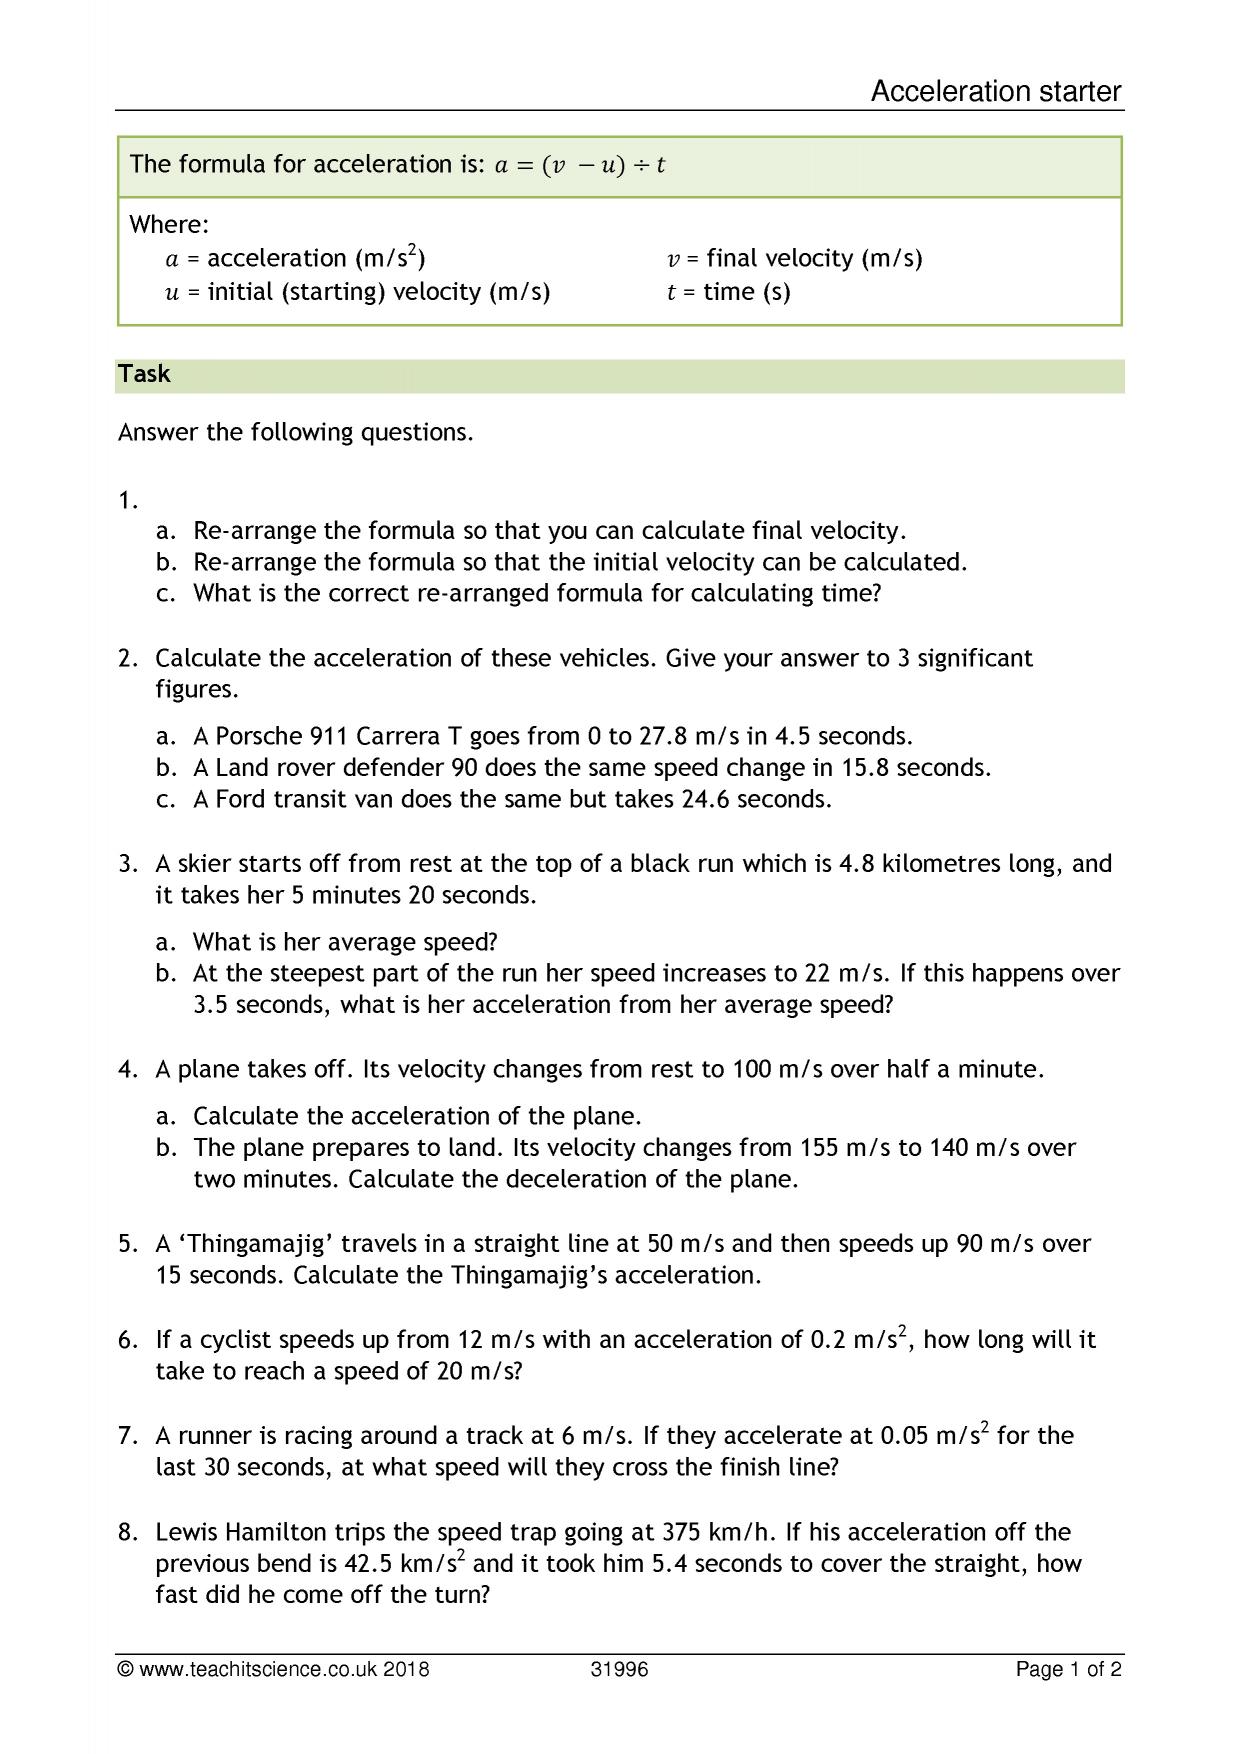 GCSE Acceleration questions With Acceleration Practice Problems Worksheet